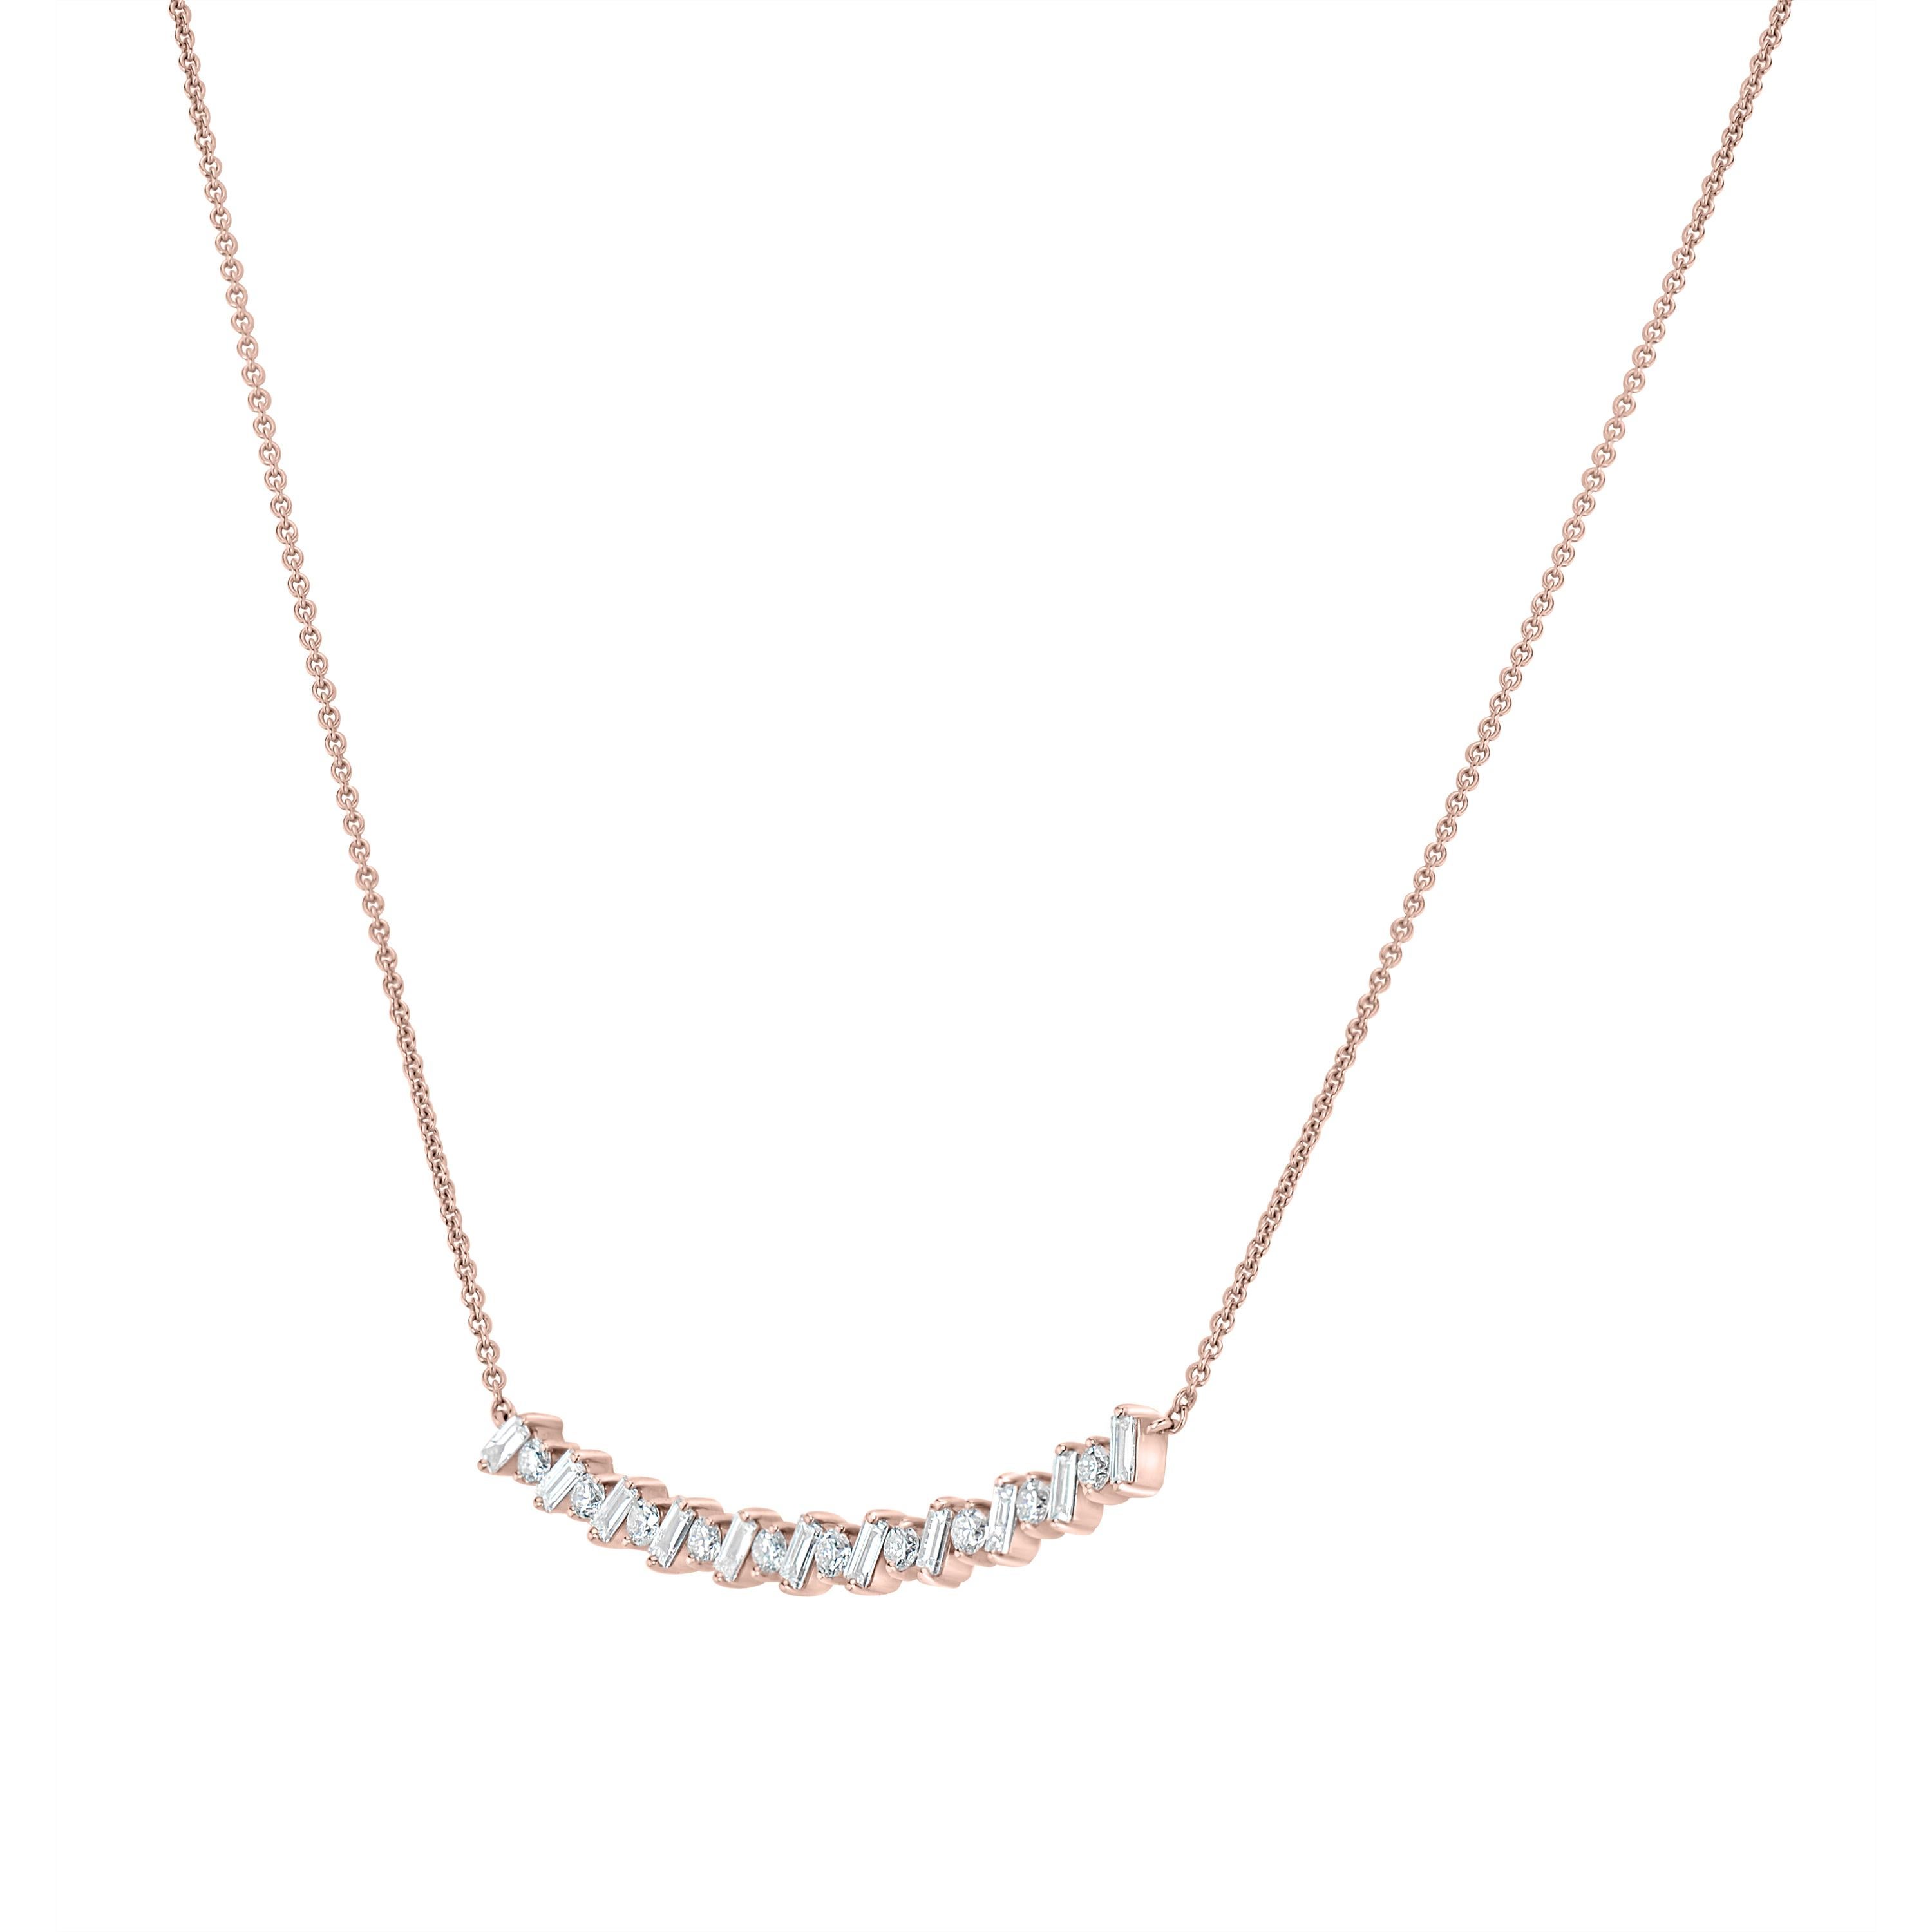 This Luxle Round and Baguette Diamond Curve Pendant Necklace will definitely put a smile on your face. Crafted in 14K rose gold, the pendant shimmers with baguette and round diamonds totaling 0.47Cts alternating in a curve. The pendant is suspended